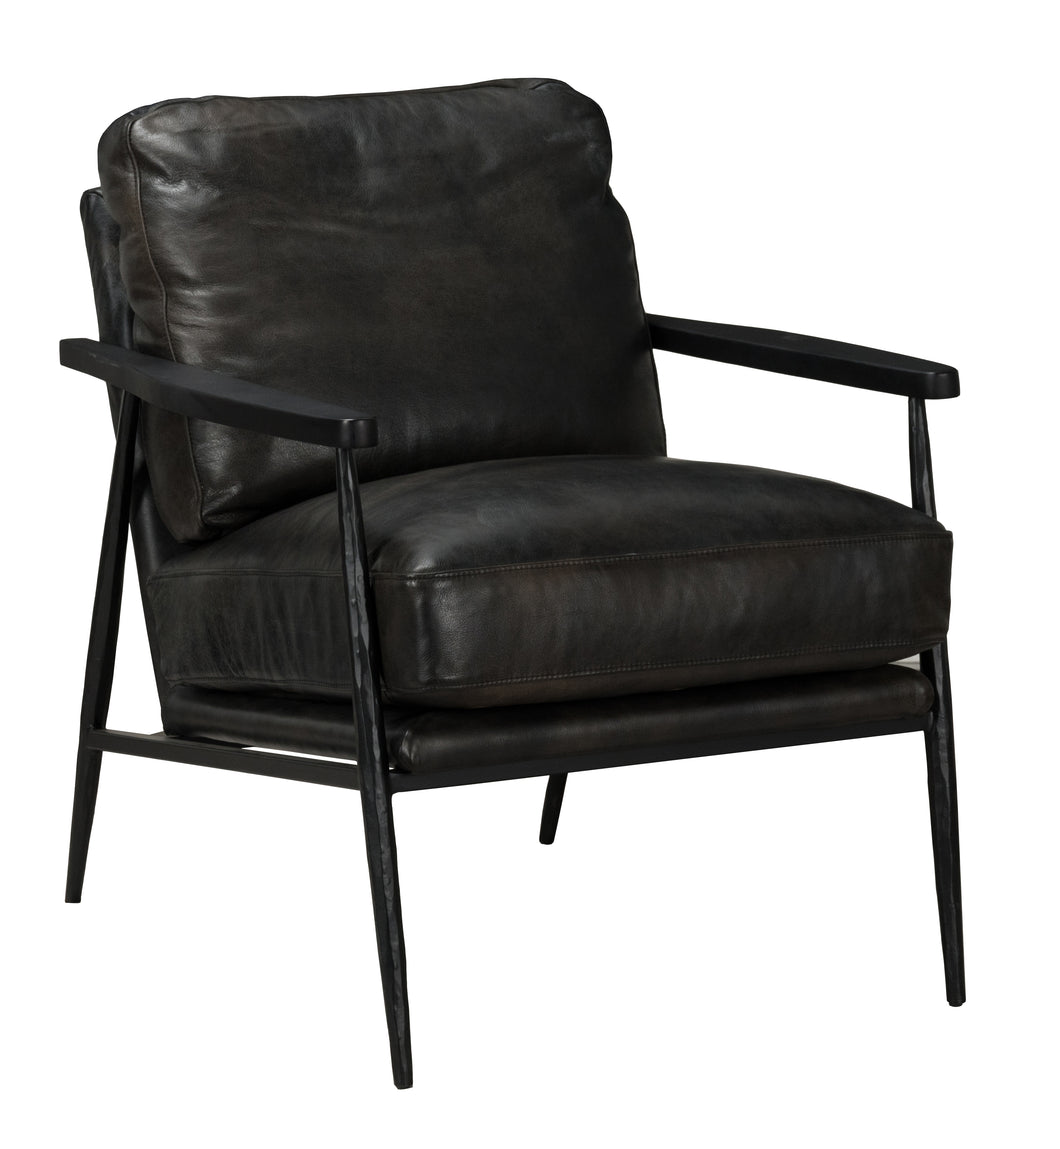 Christopher Club Accent Chair - Black